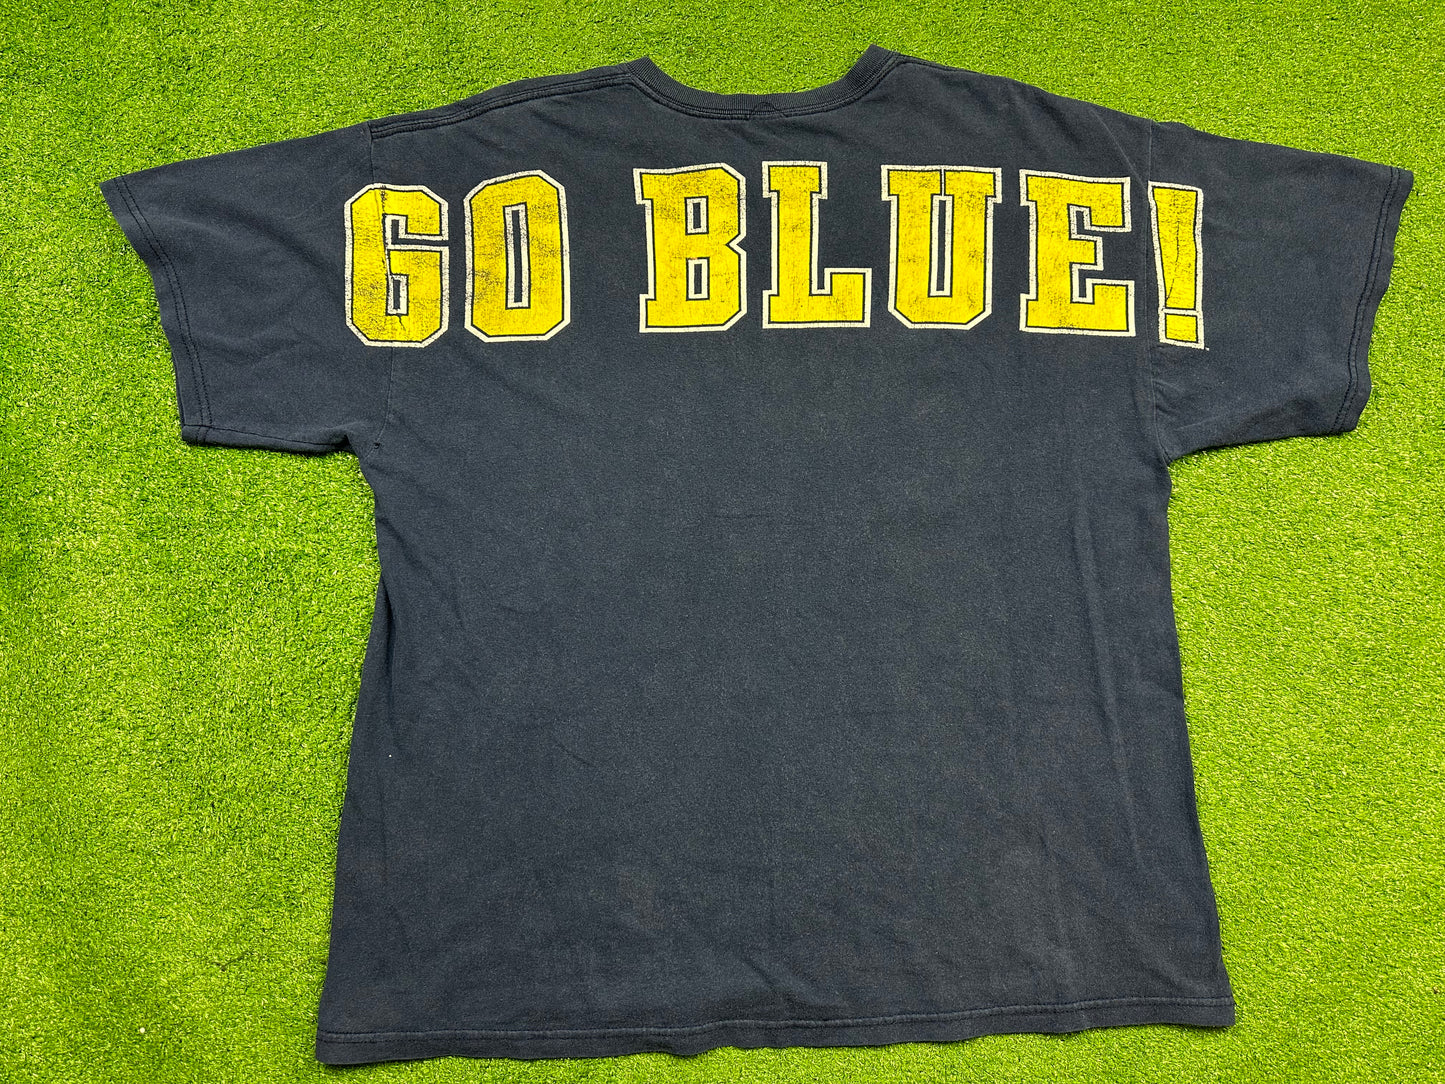 Michigan Spell-Out T-Shirt